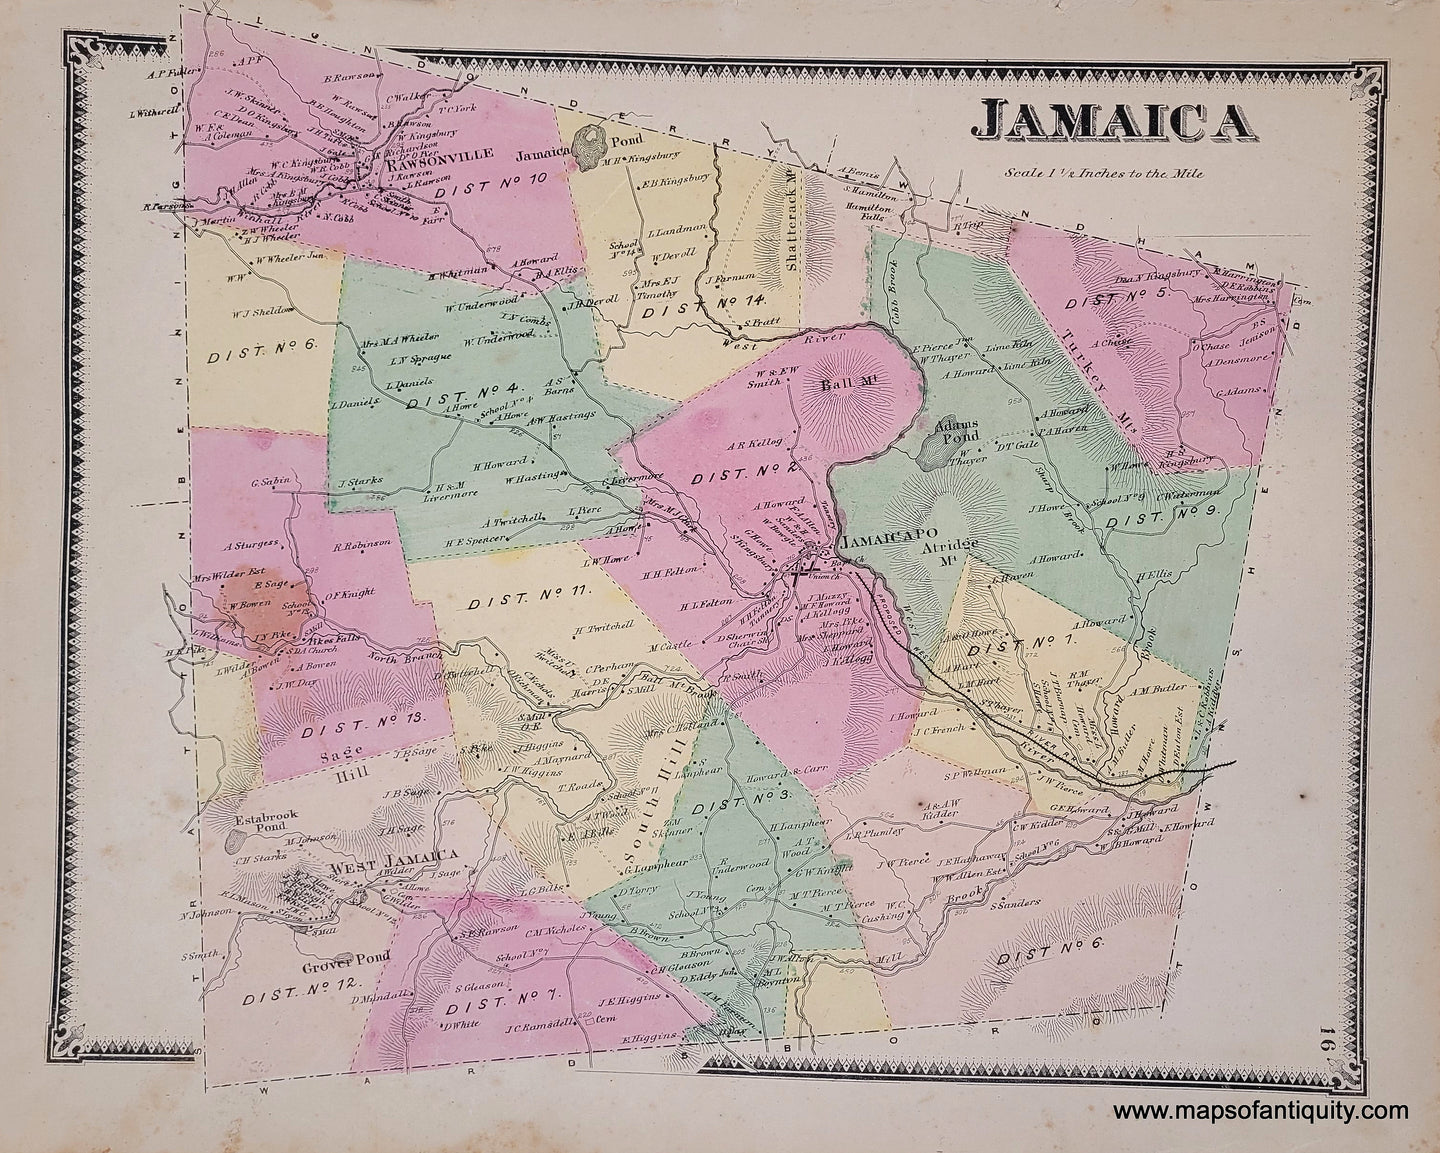 Antique-Hand-Colored-Map-Jamaica-VT---Vermont-United-States-Northeast-1869-Beers-Maps-Of-Antiquity